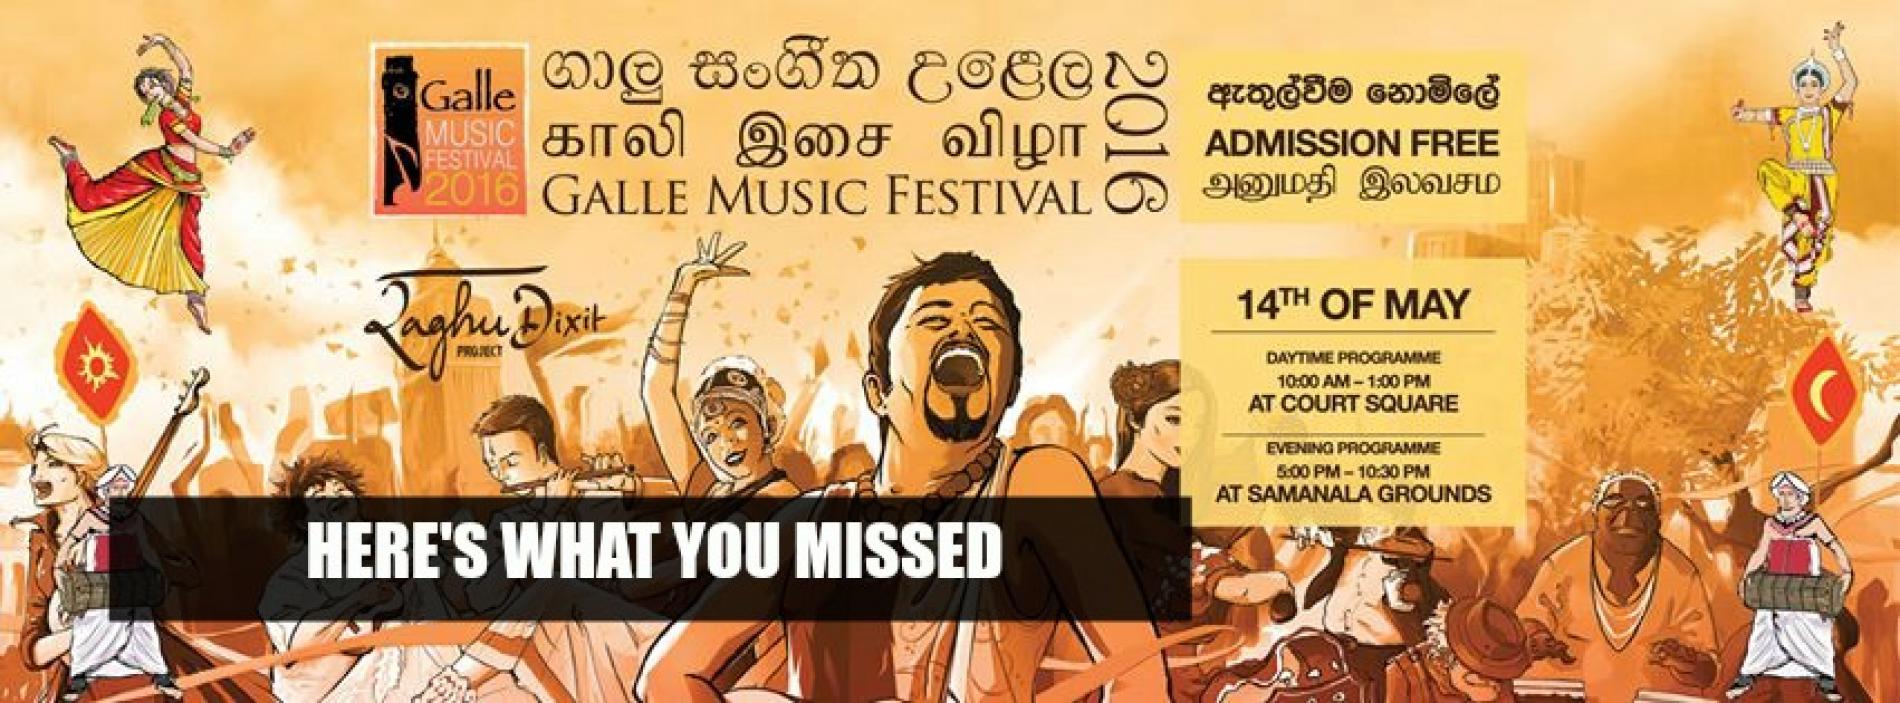 Galle Music Festival : Here’s What You Missed